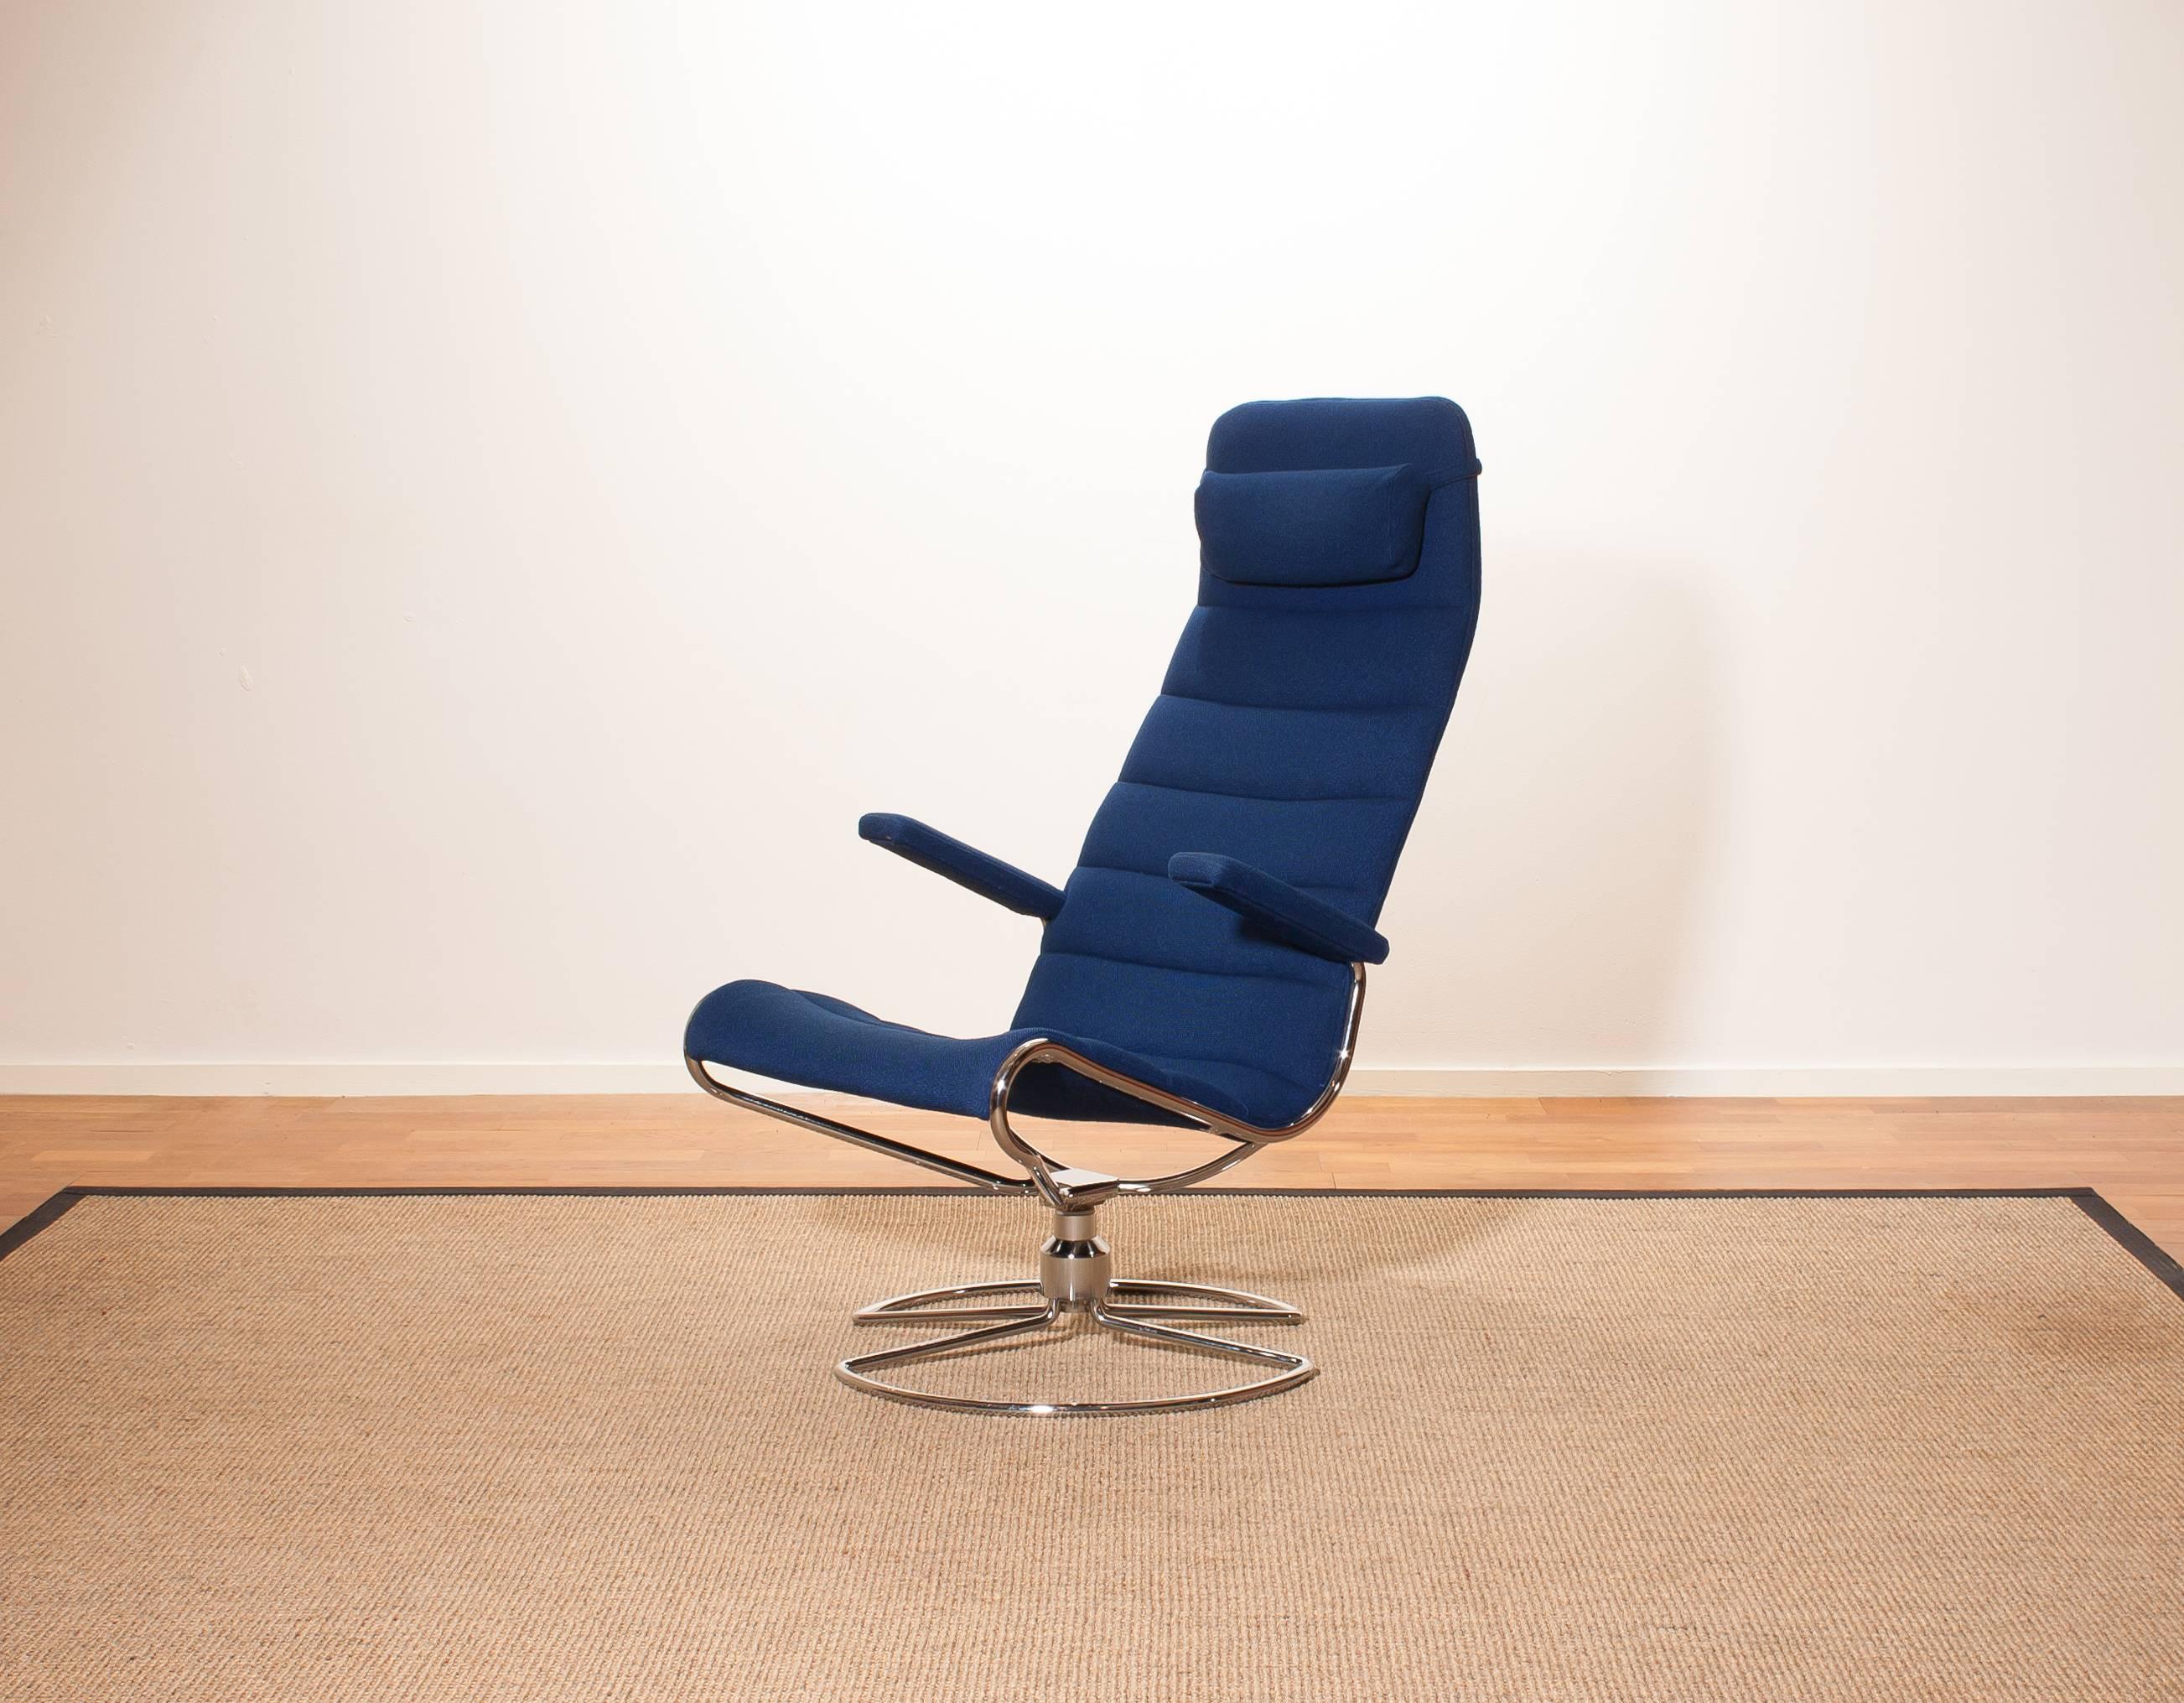 Beautiful 'Minister' chair designed by Bruno Mathsson.
It is upholstered with a Royal Blue wooden fabric mounted on a swivel base of tubular chromed steel. 
The chair is in a very good condition. 
Period 1980s
Dimensions: H. 109 cm, W. 60 cm, D.